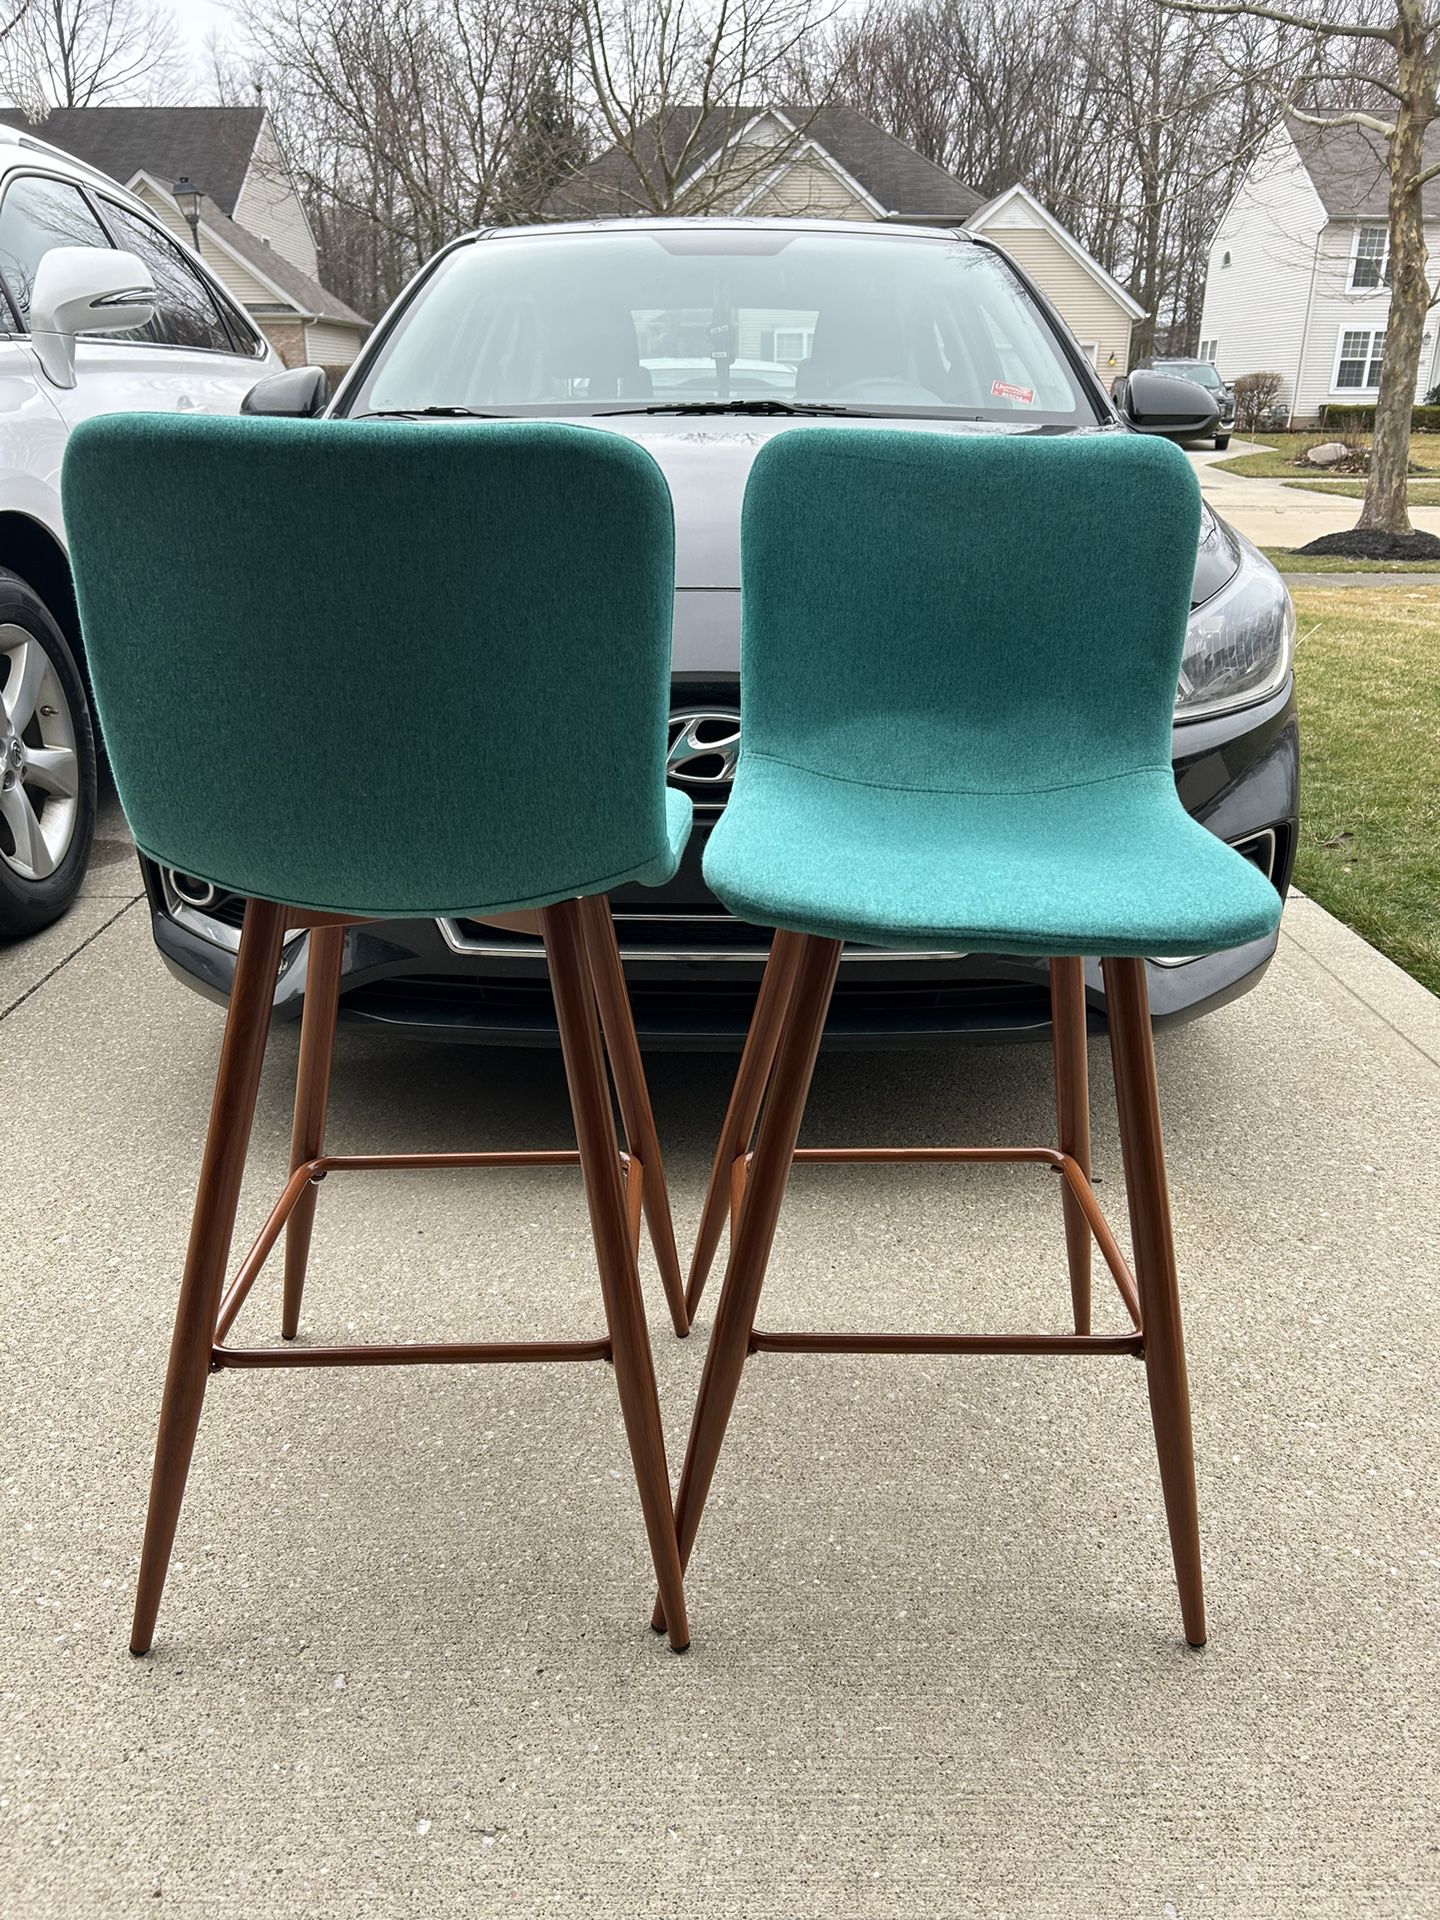 SET OF 2 TEAL CHAIRS ON SALE! 